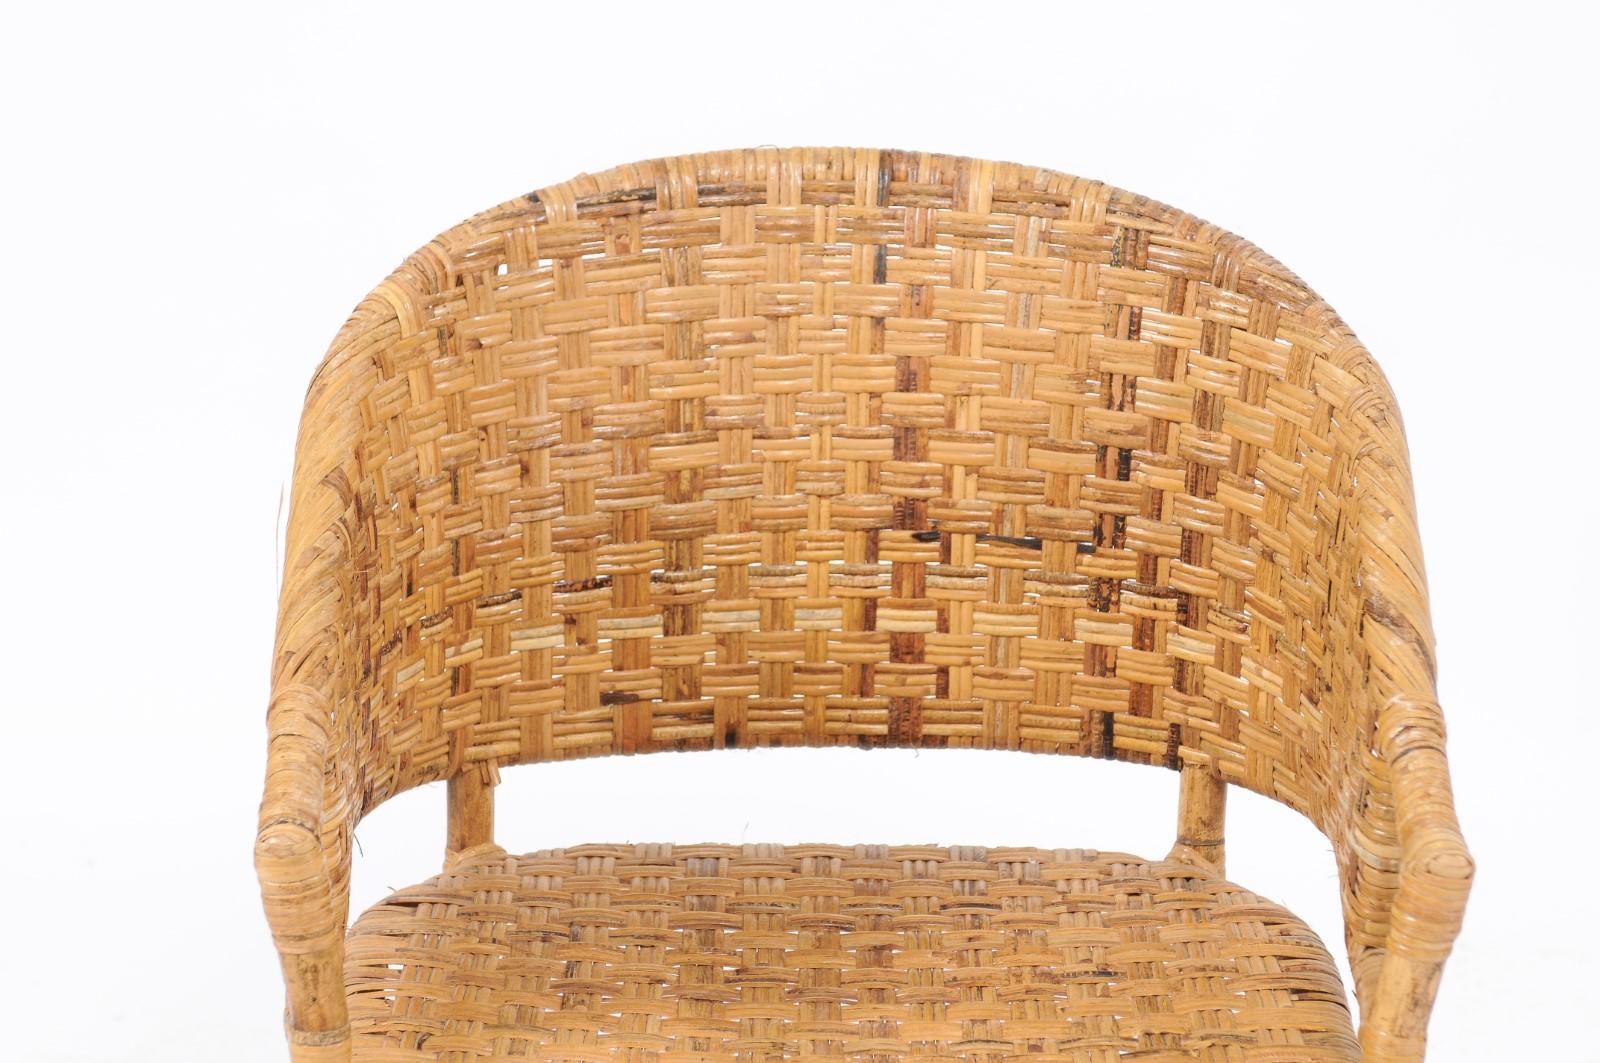 A pair of vintage French woven rattan and bamboo chairs from the midcentury period, with a subtle Chinoiserie inspiration. We have two pairs available, priced and sold per pair. We’re obsessed with all things basket weave, rattan and bamboo, and